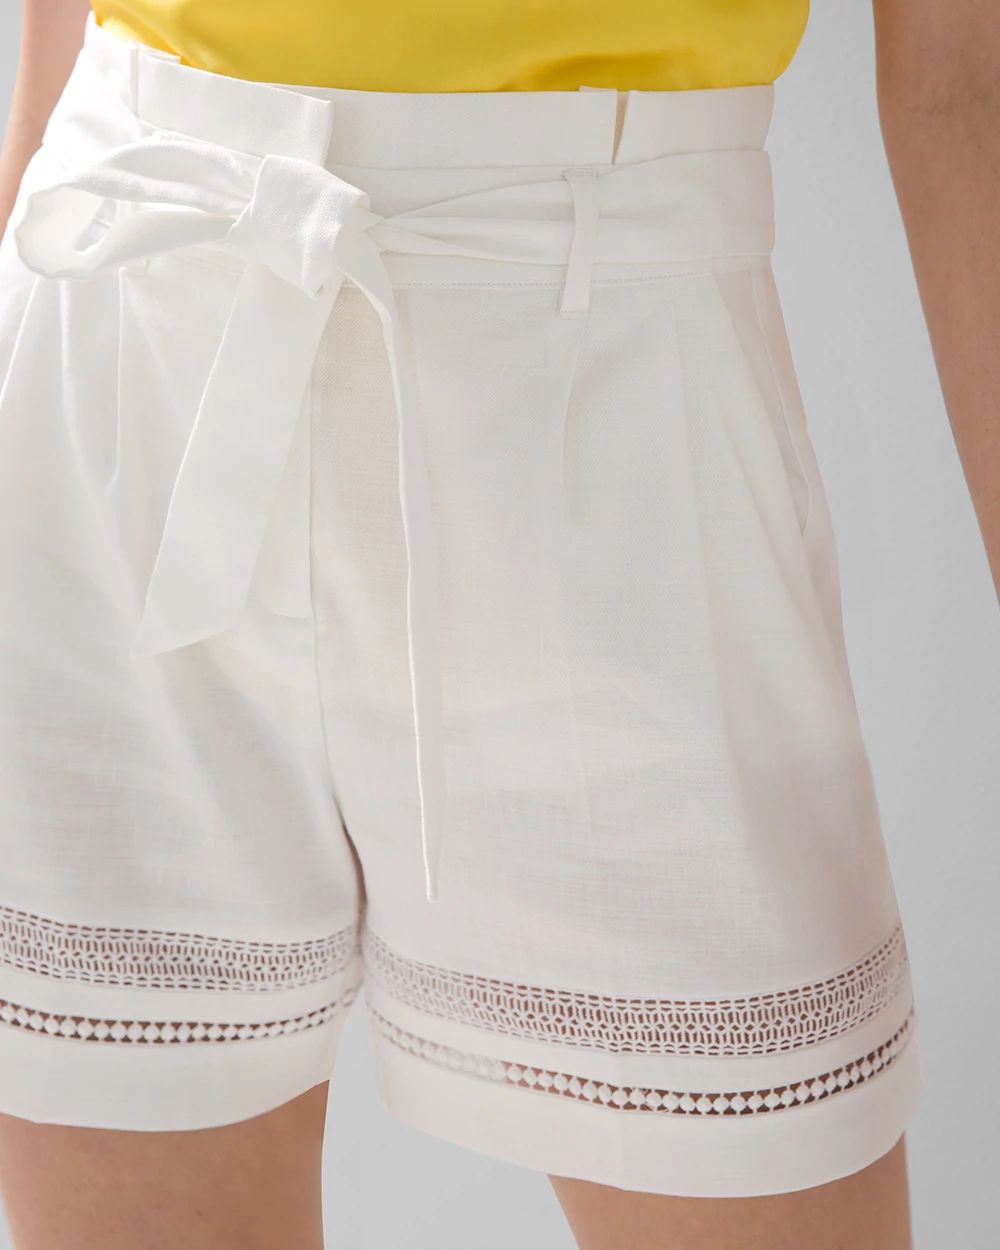 High-Rise Linen Shorts click to view larger image.